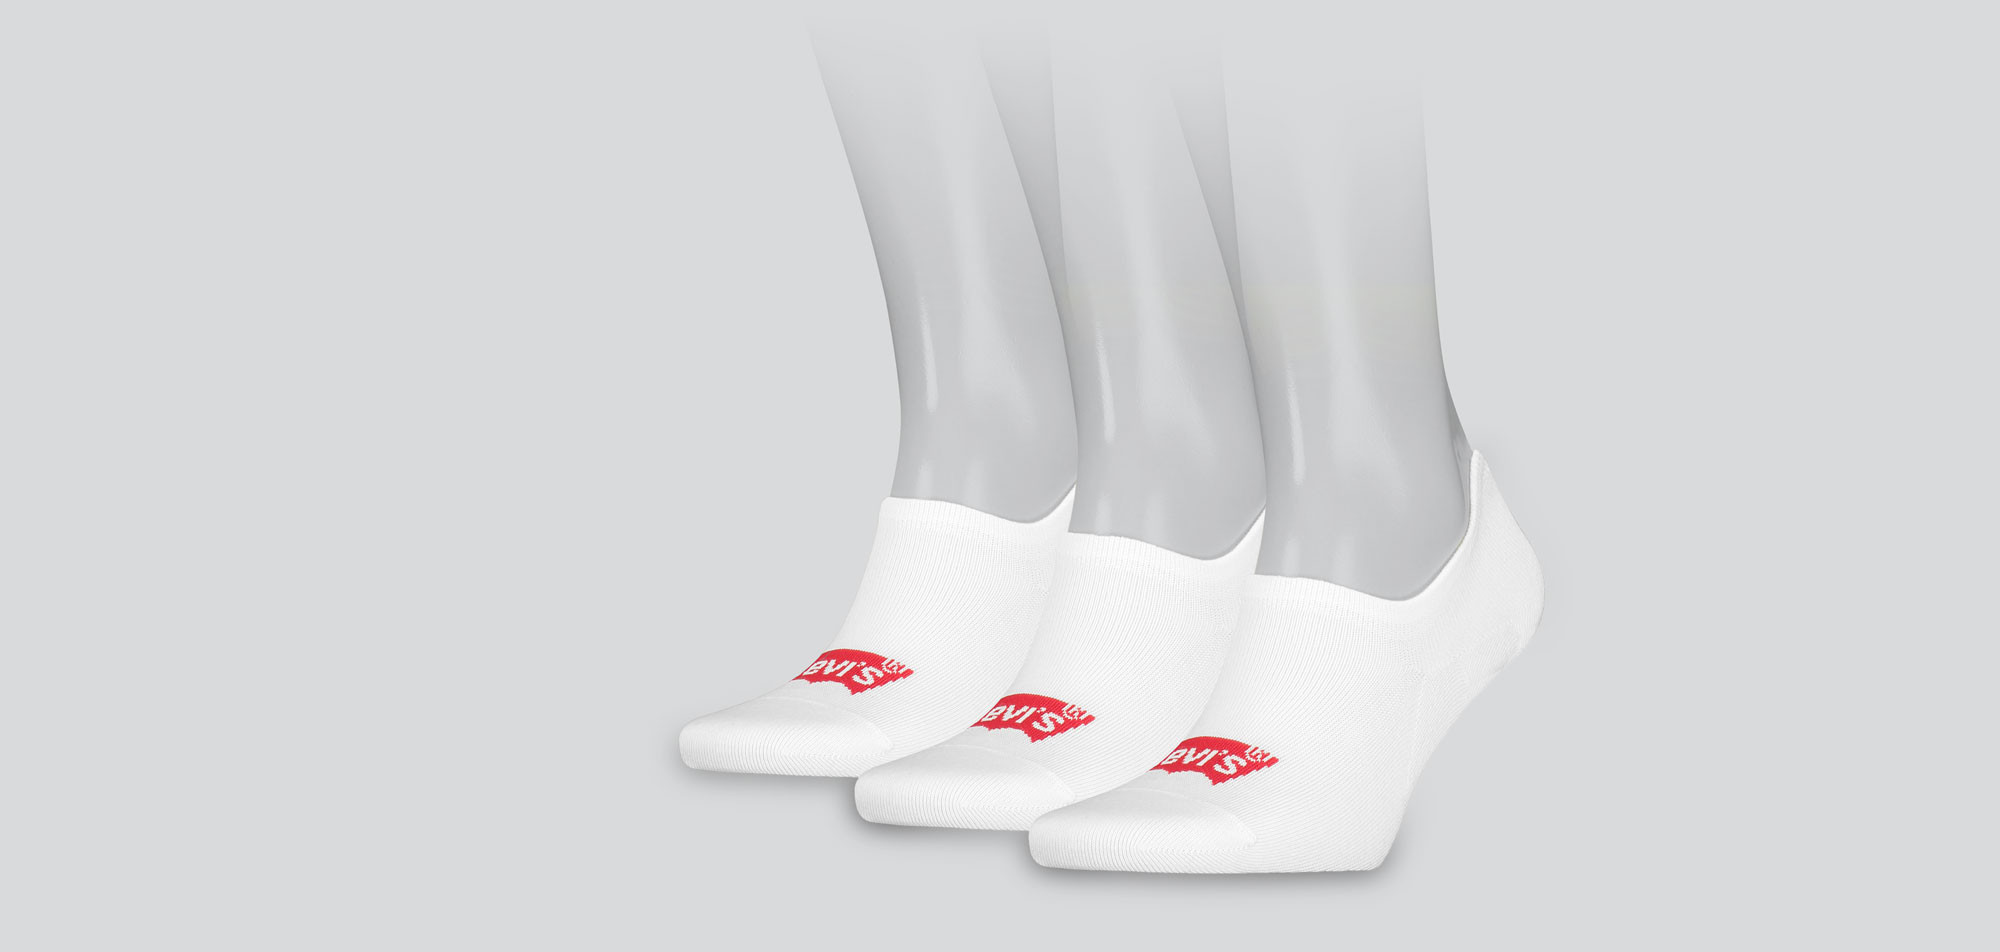 Levi_s High Rise Batwing Logo Footie Socks 3-Pack 129,